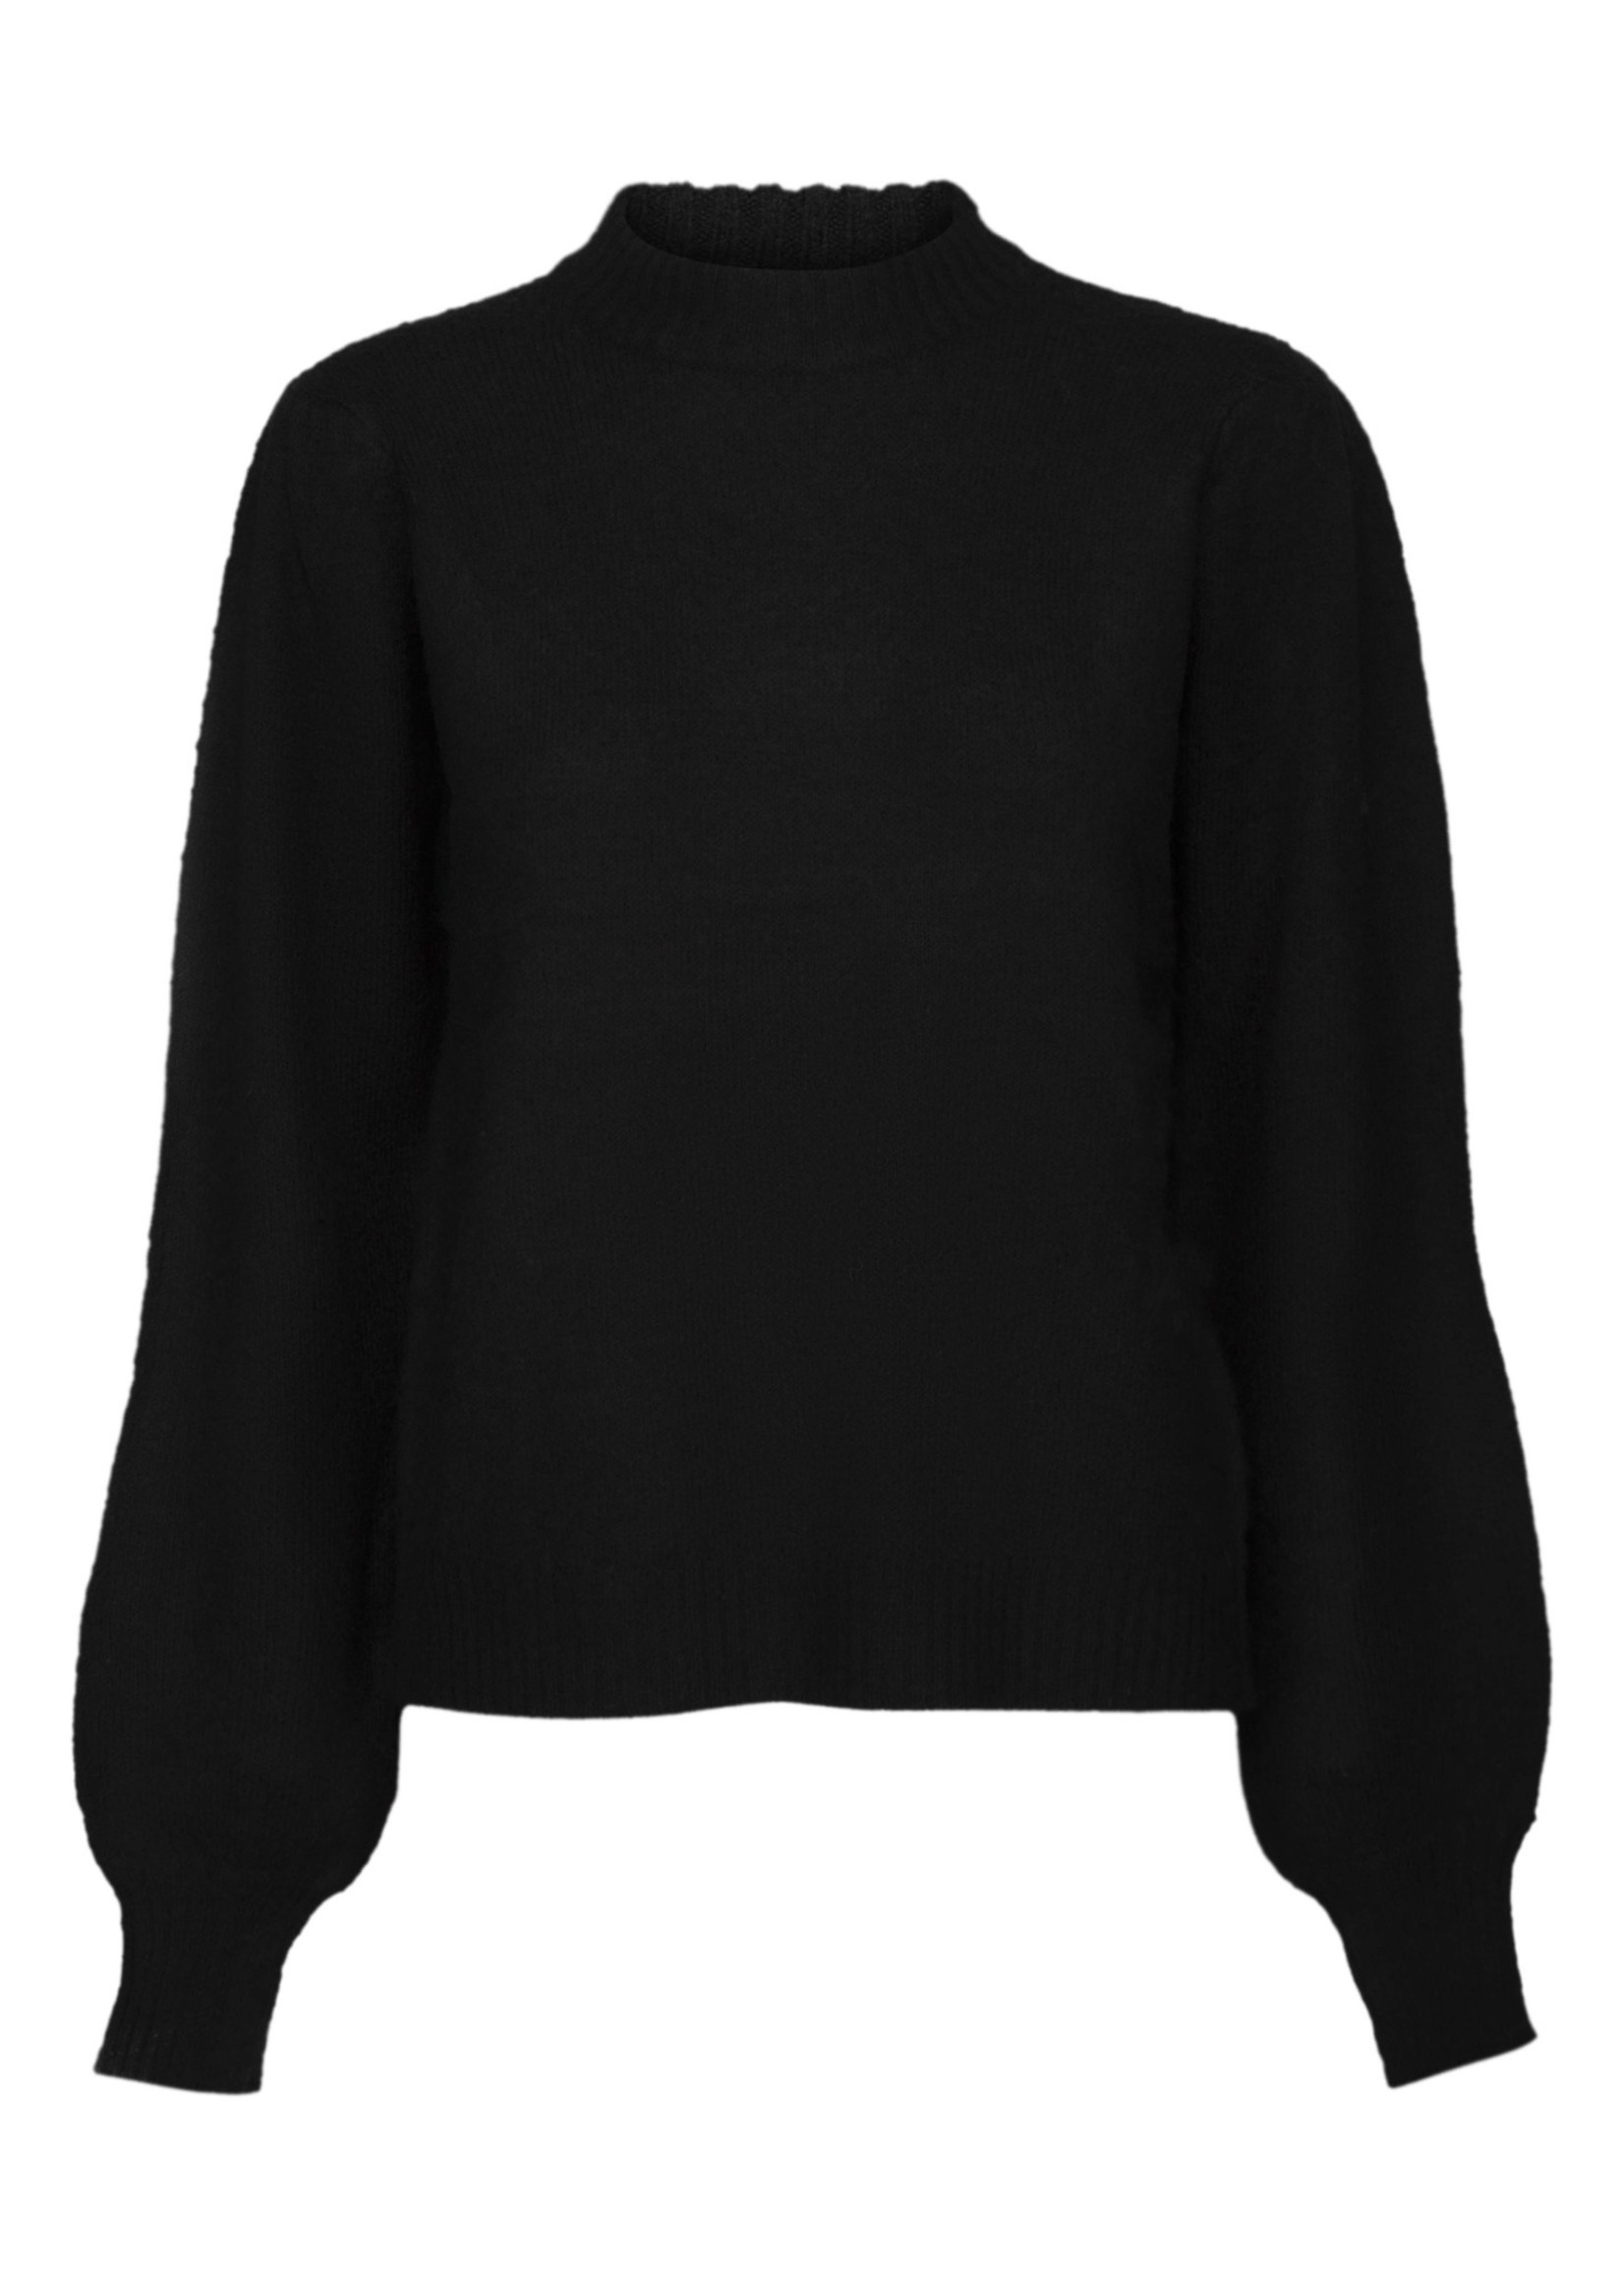 MINUS Angie knit pullover Black